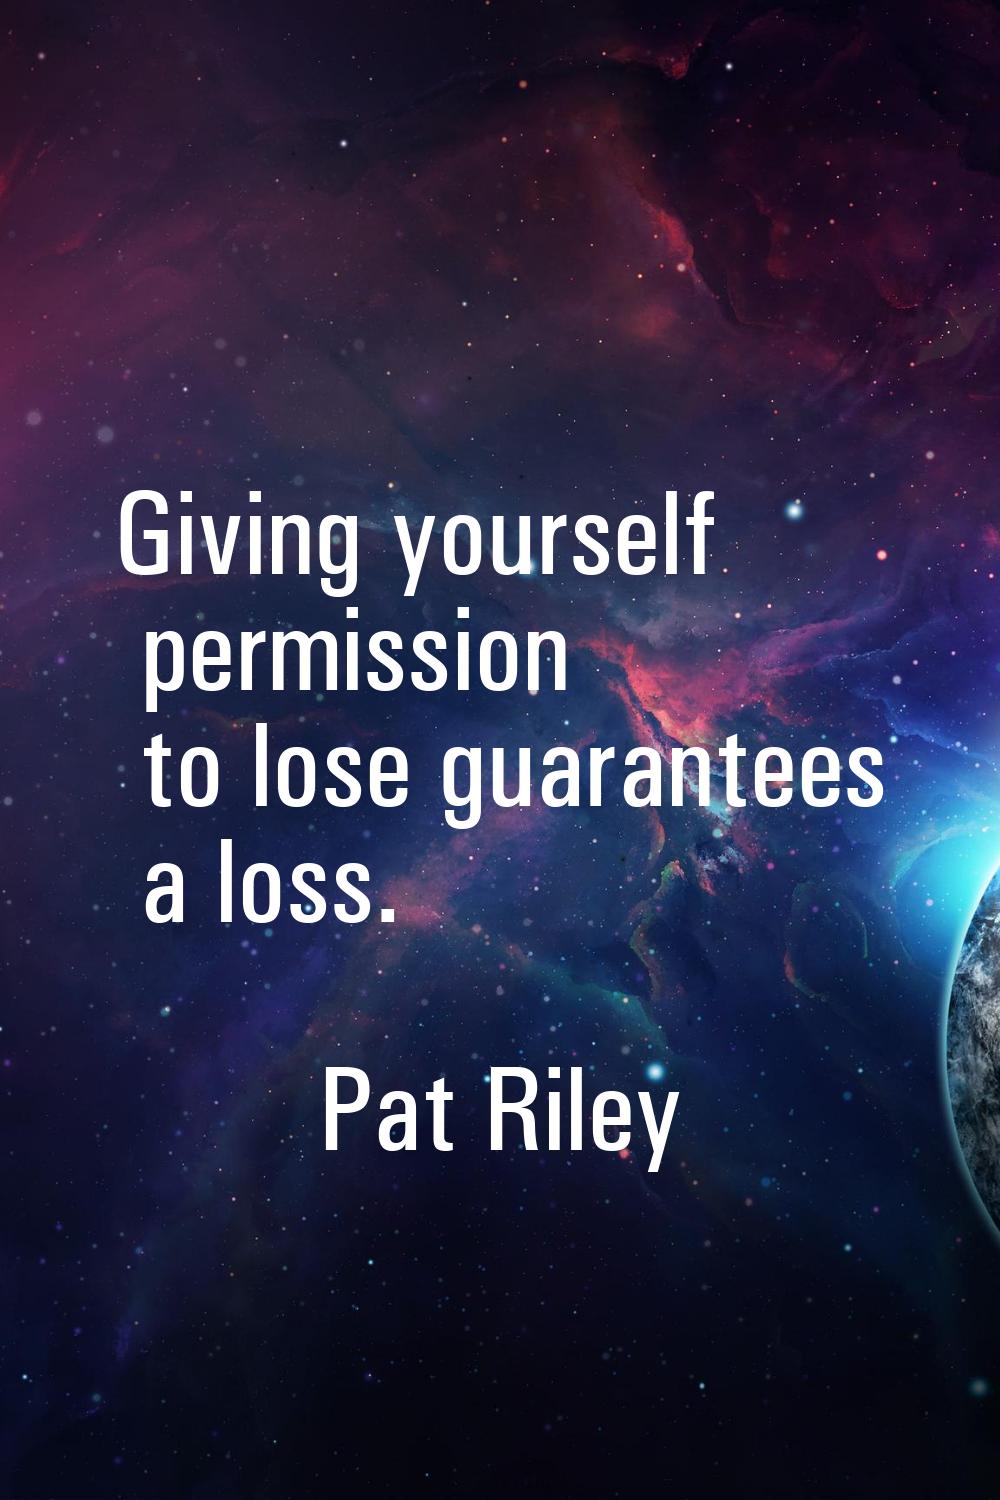 Giving yourself permission to lose guarantees a loss.